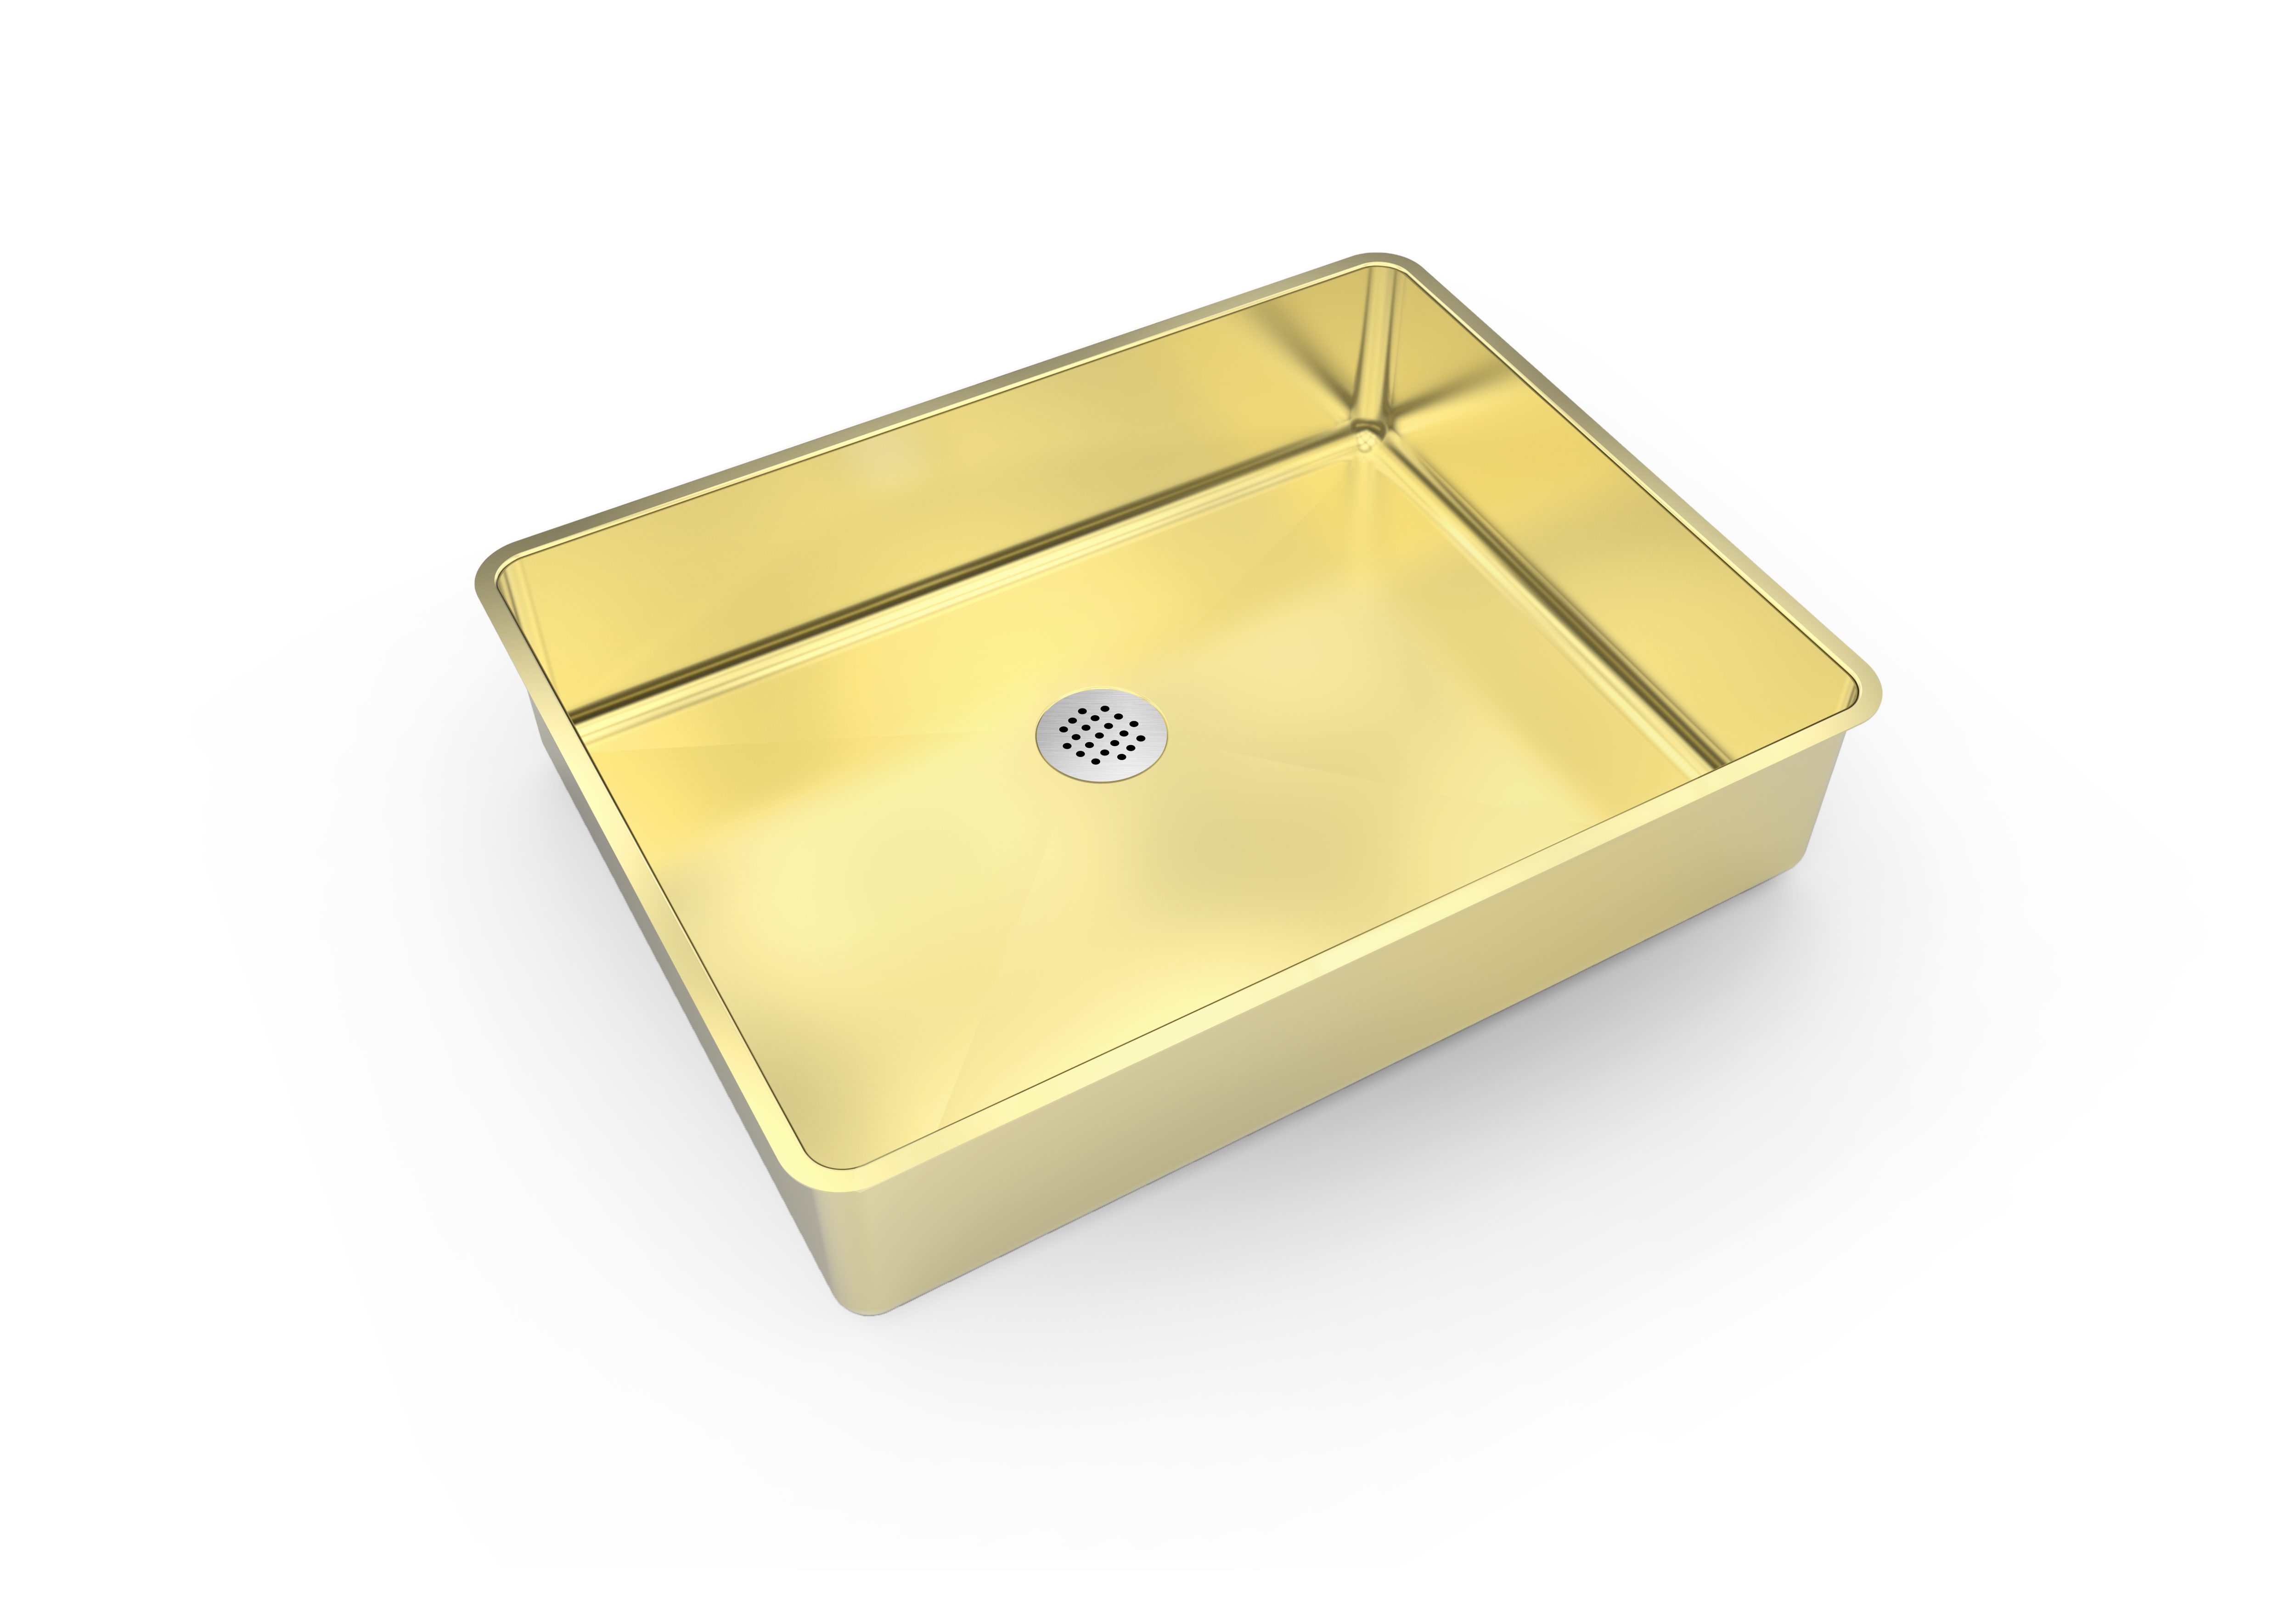 Nortrends Stainless Steel Handmade Undermont Sink Size: 480×370 mm – Gold RR4837-YA GOLD